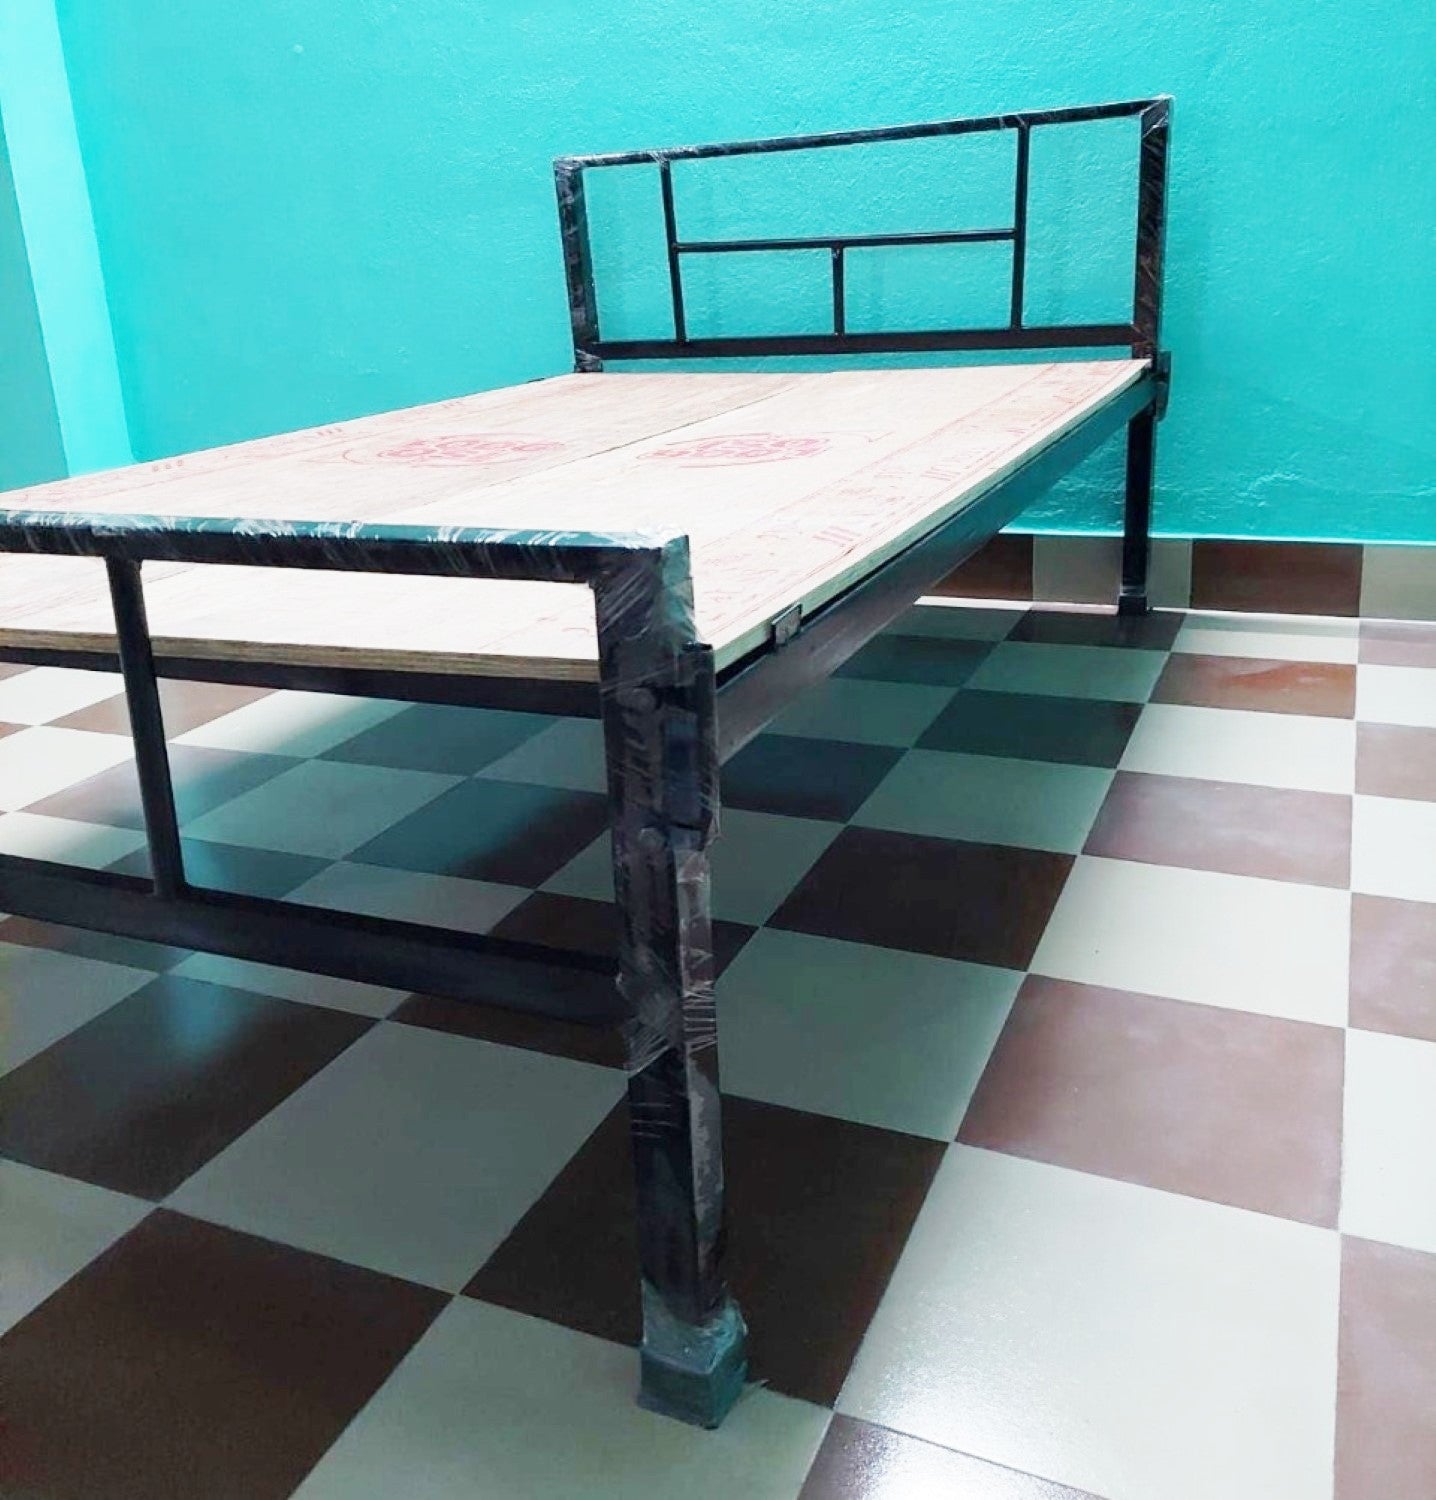 Bowzar HM Simple Design Double Bed Size 4X6.5 Feet Iron Metal Bed Bachelor Hostel PG Guest House